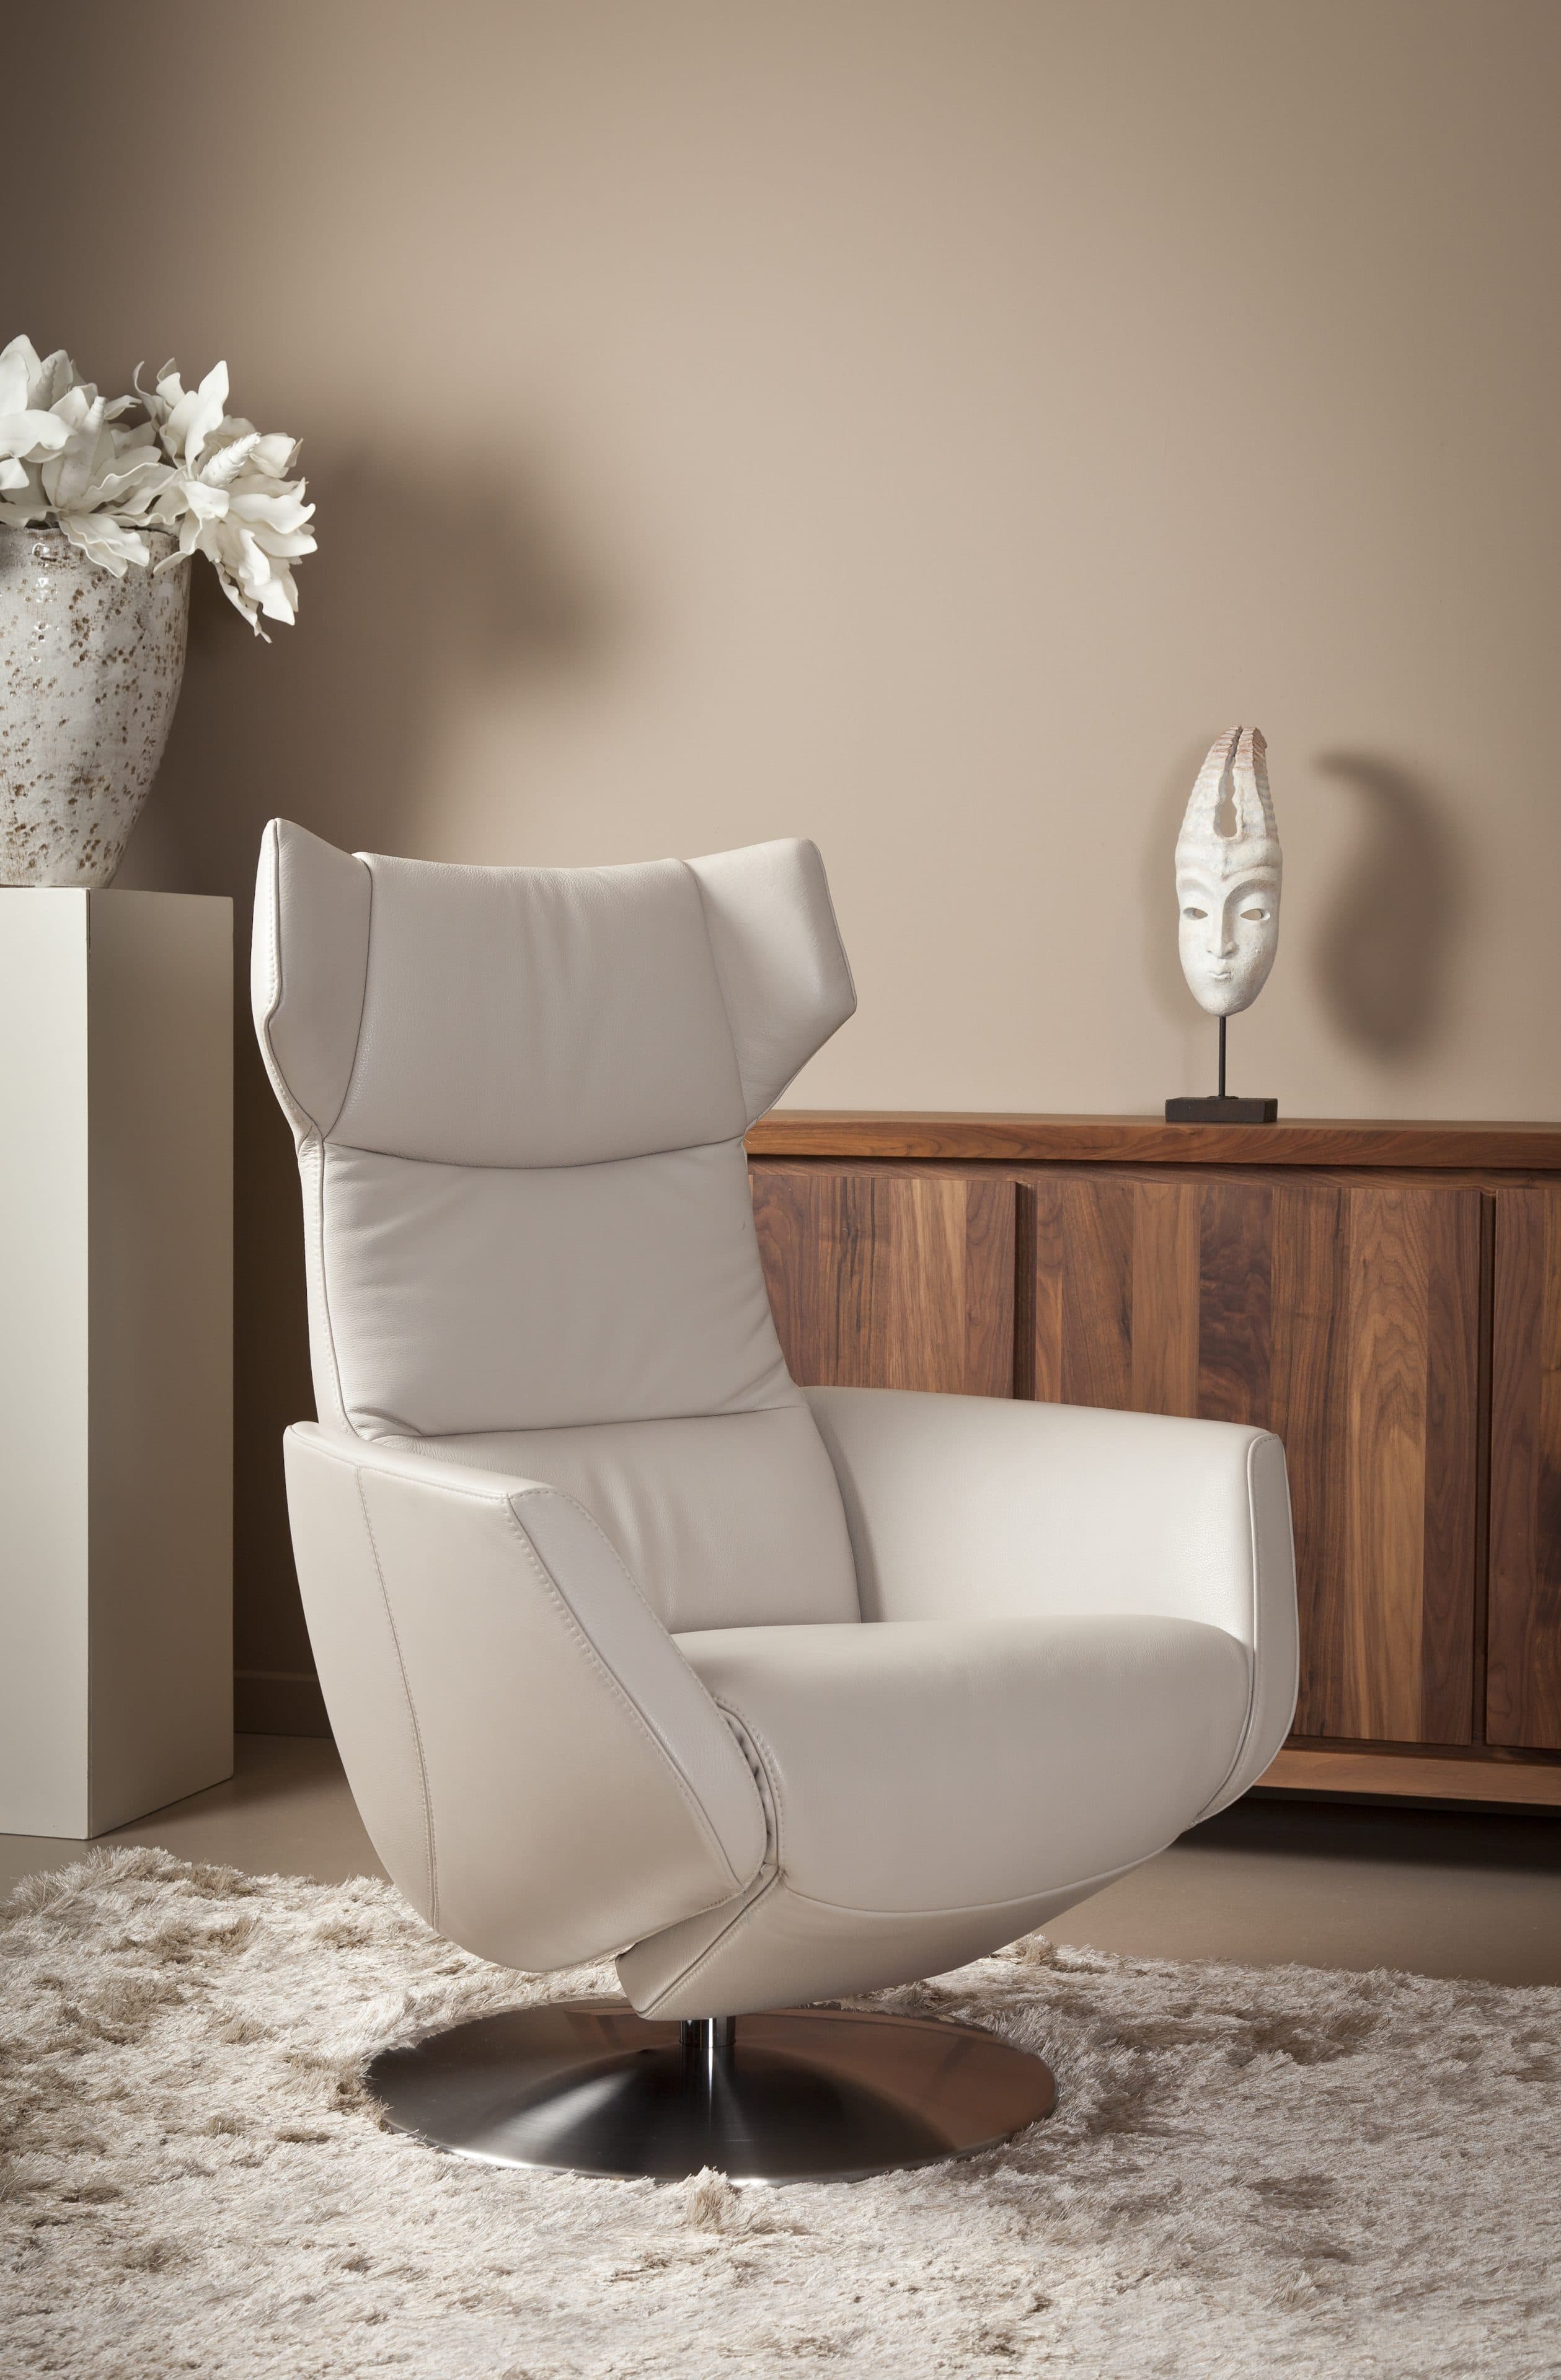 Relaxfauteuil Twice Tw206